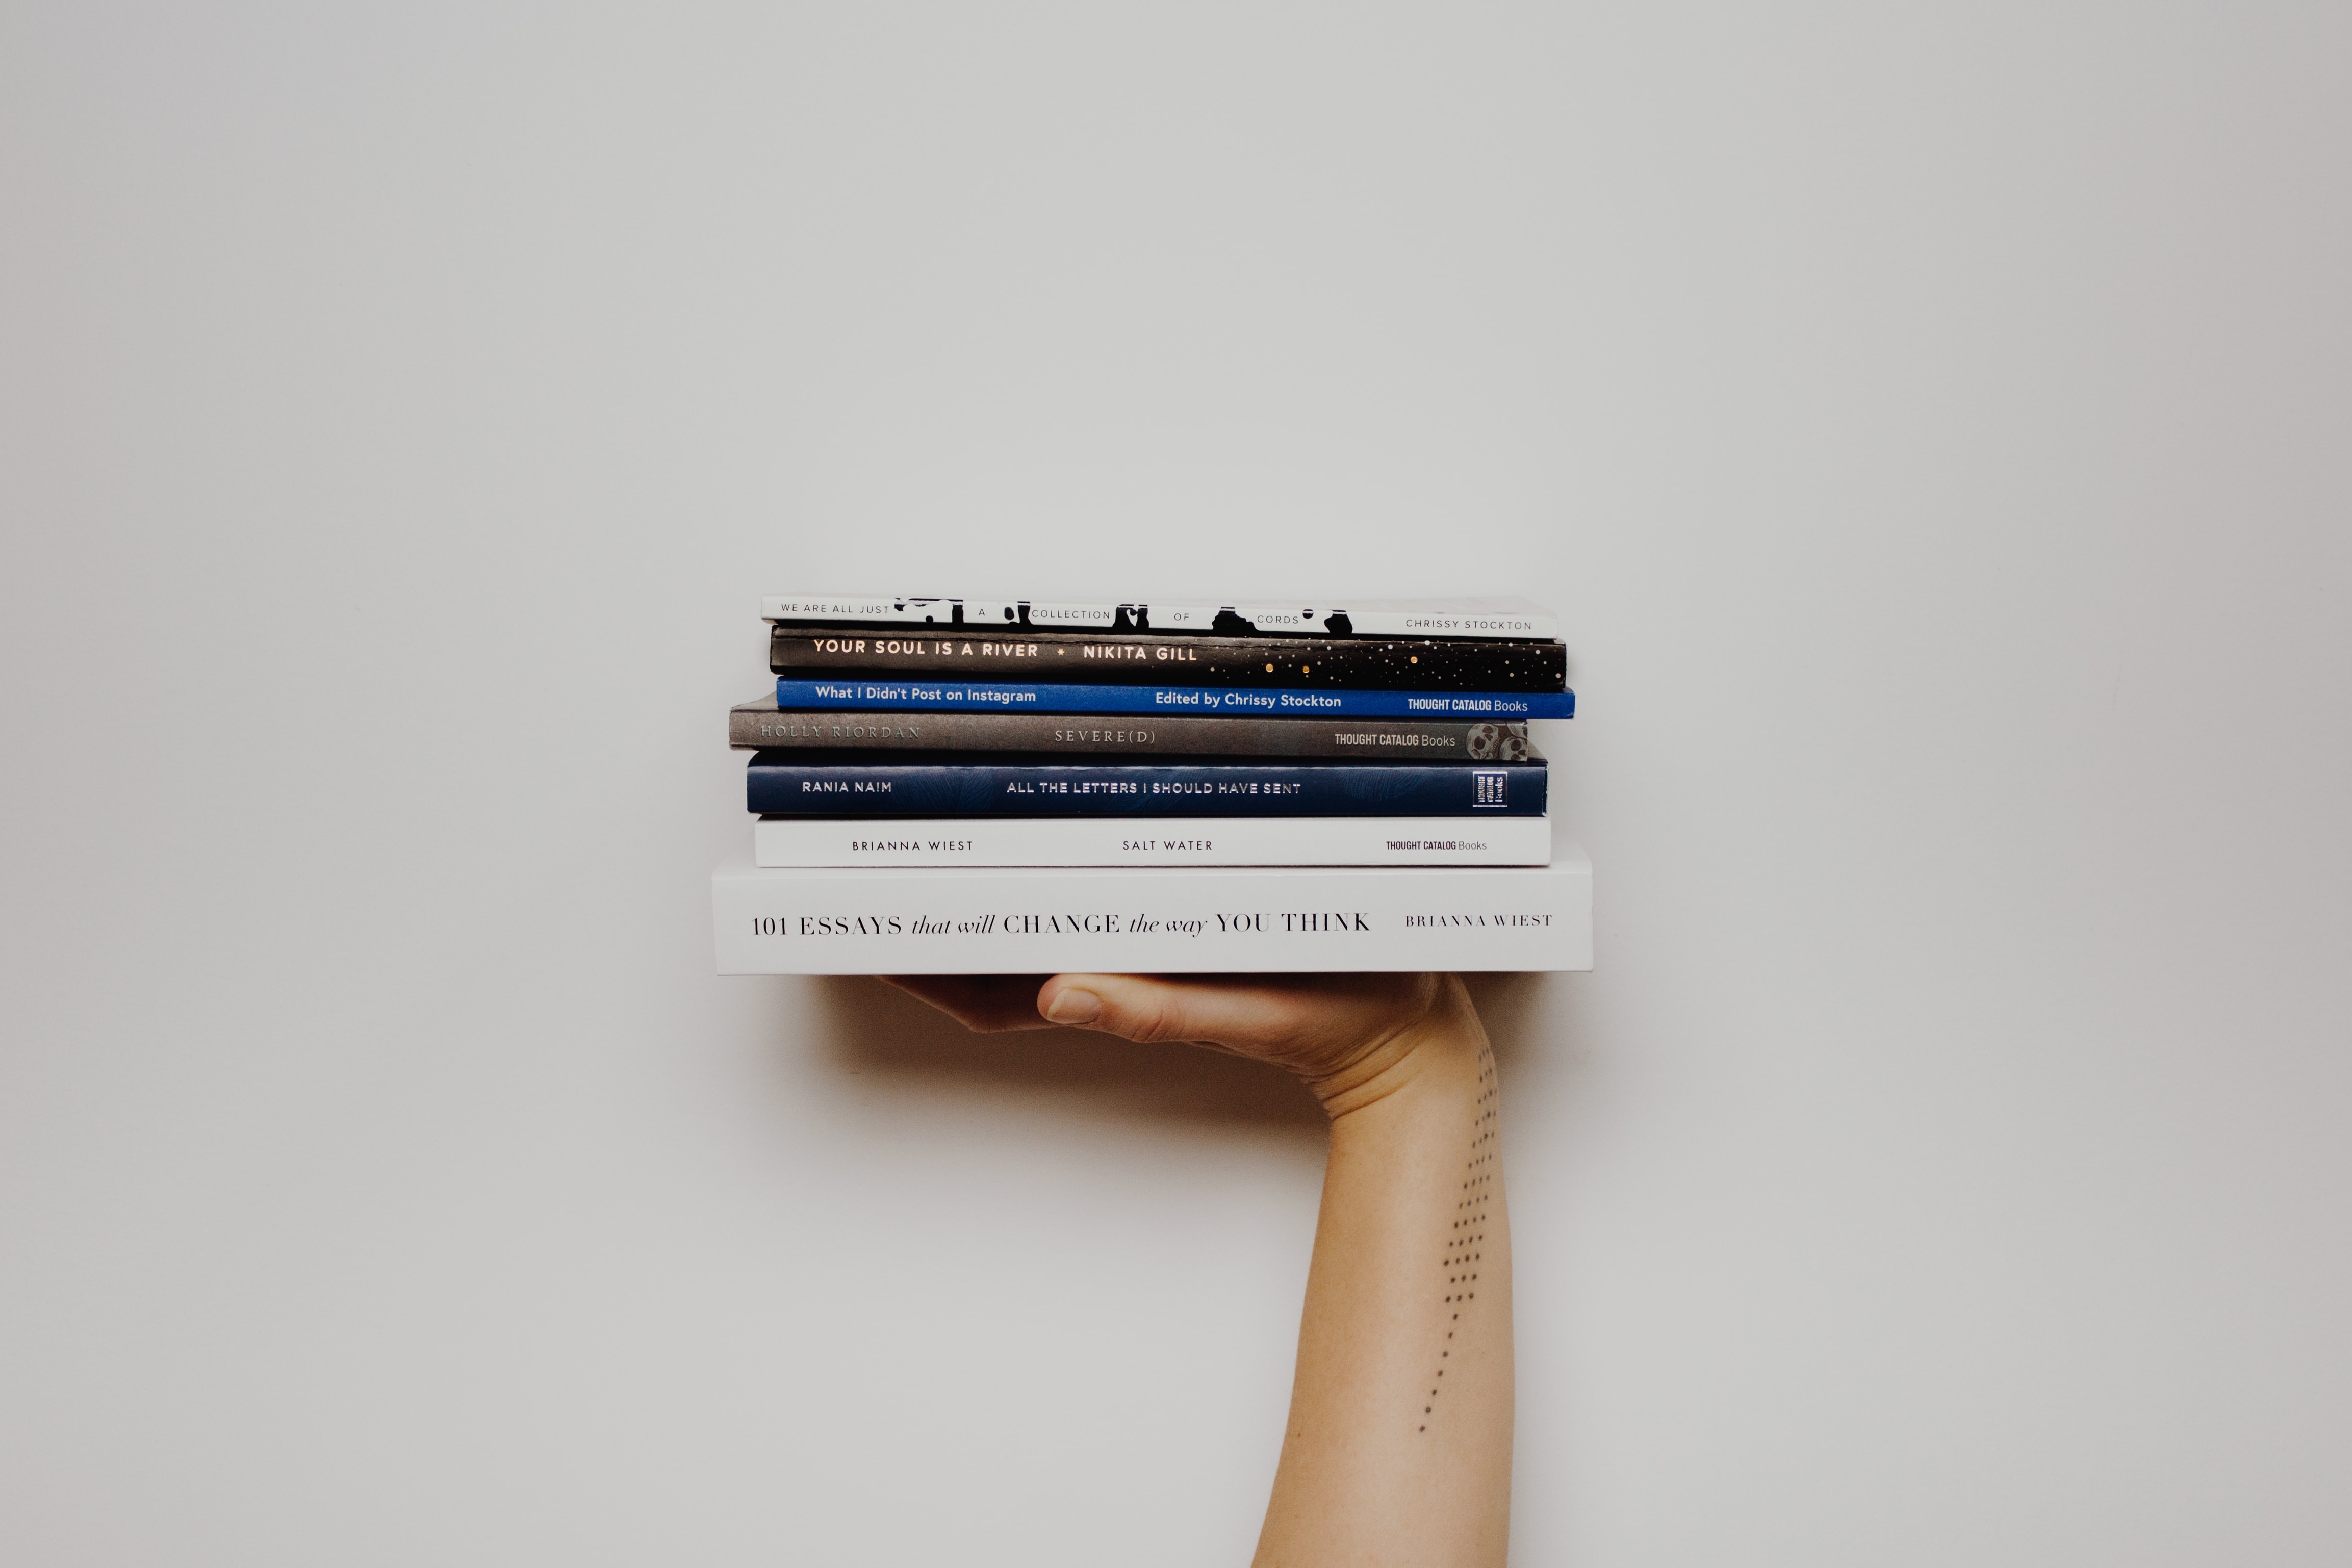 A pile of books being held by a hand against a white wall